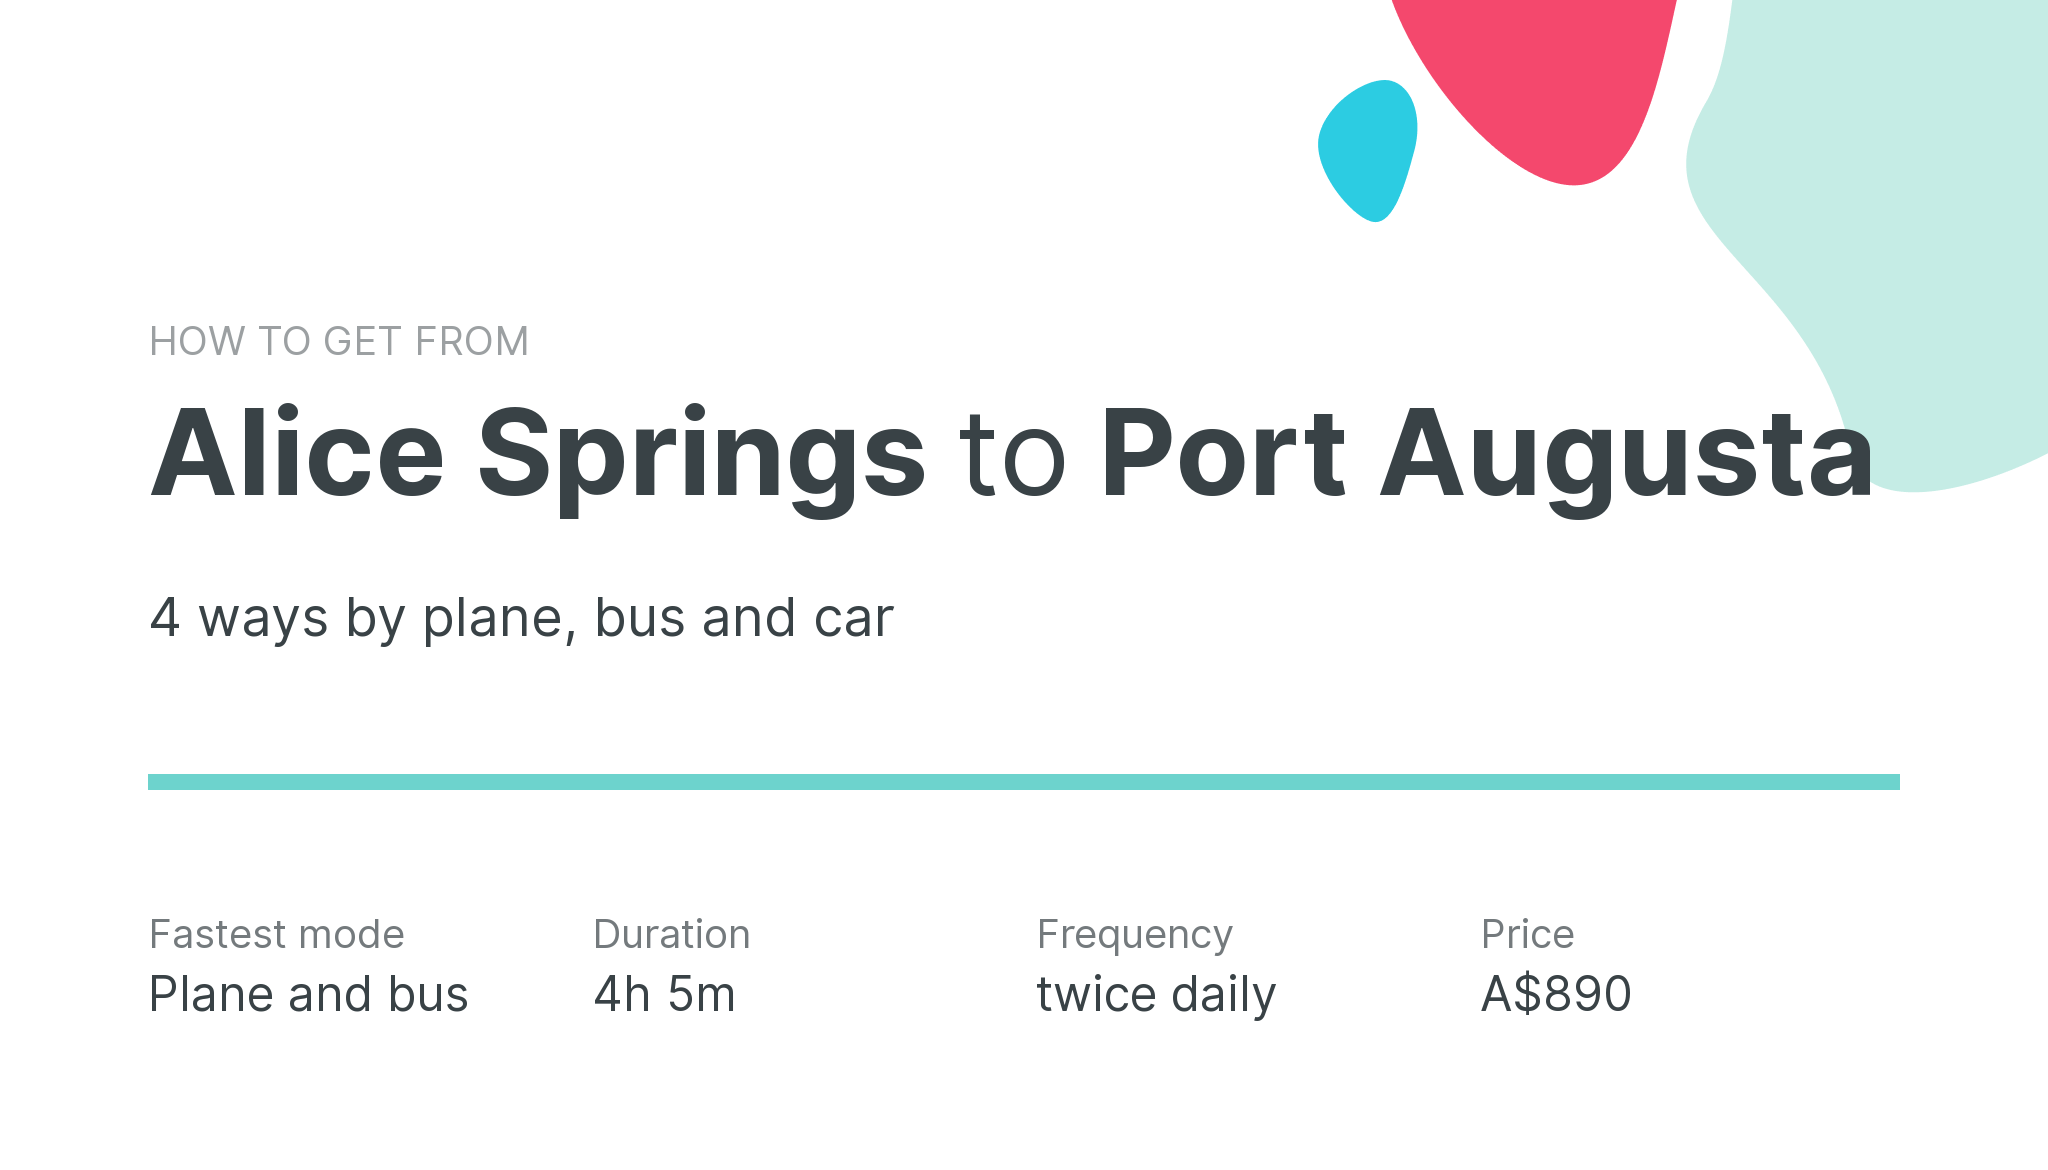 How do I get from Alice Springs to Port Augusta